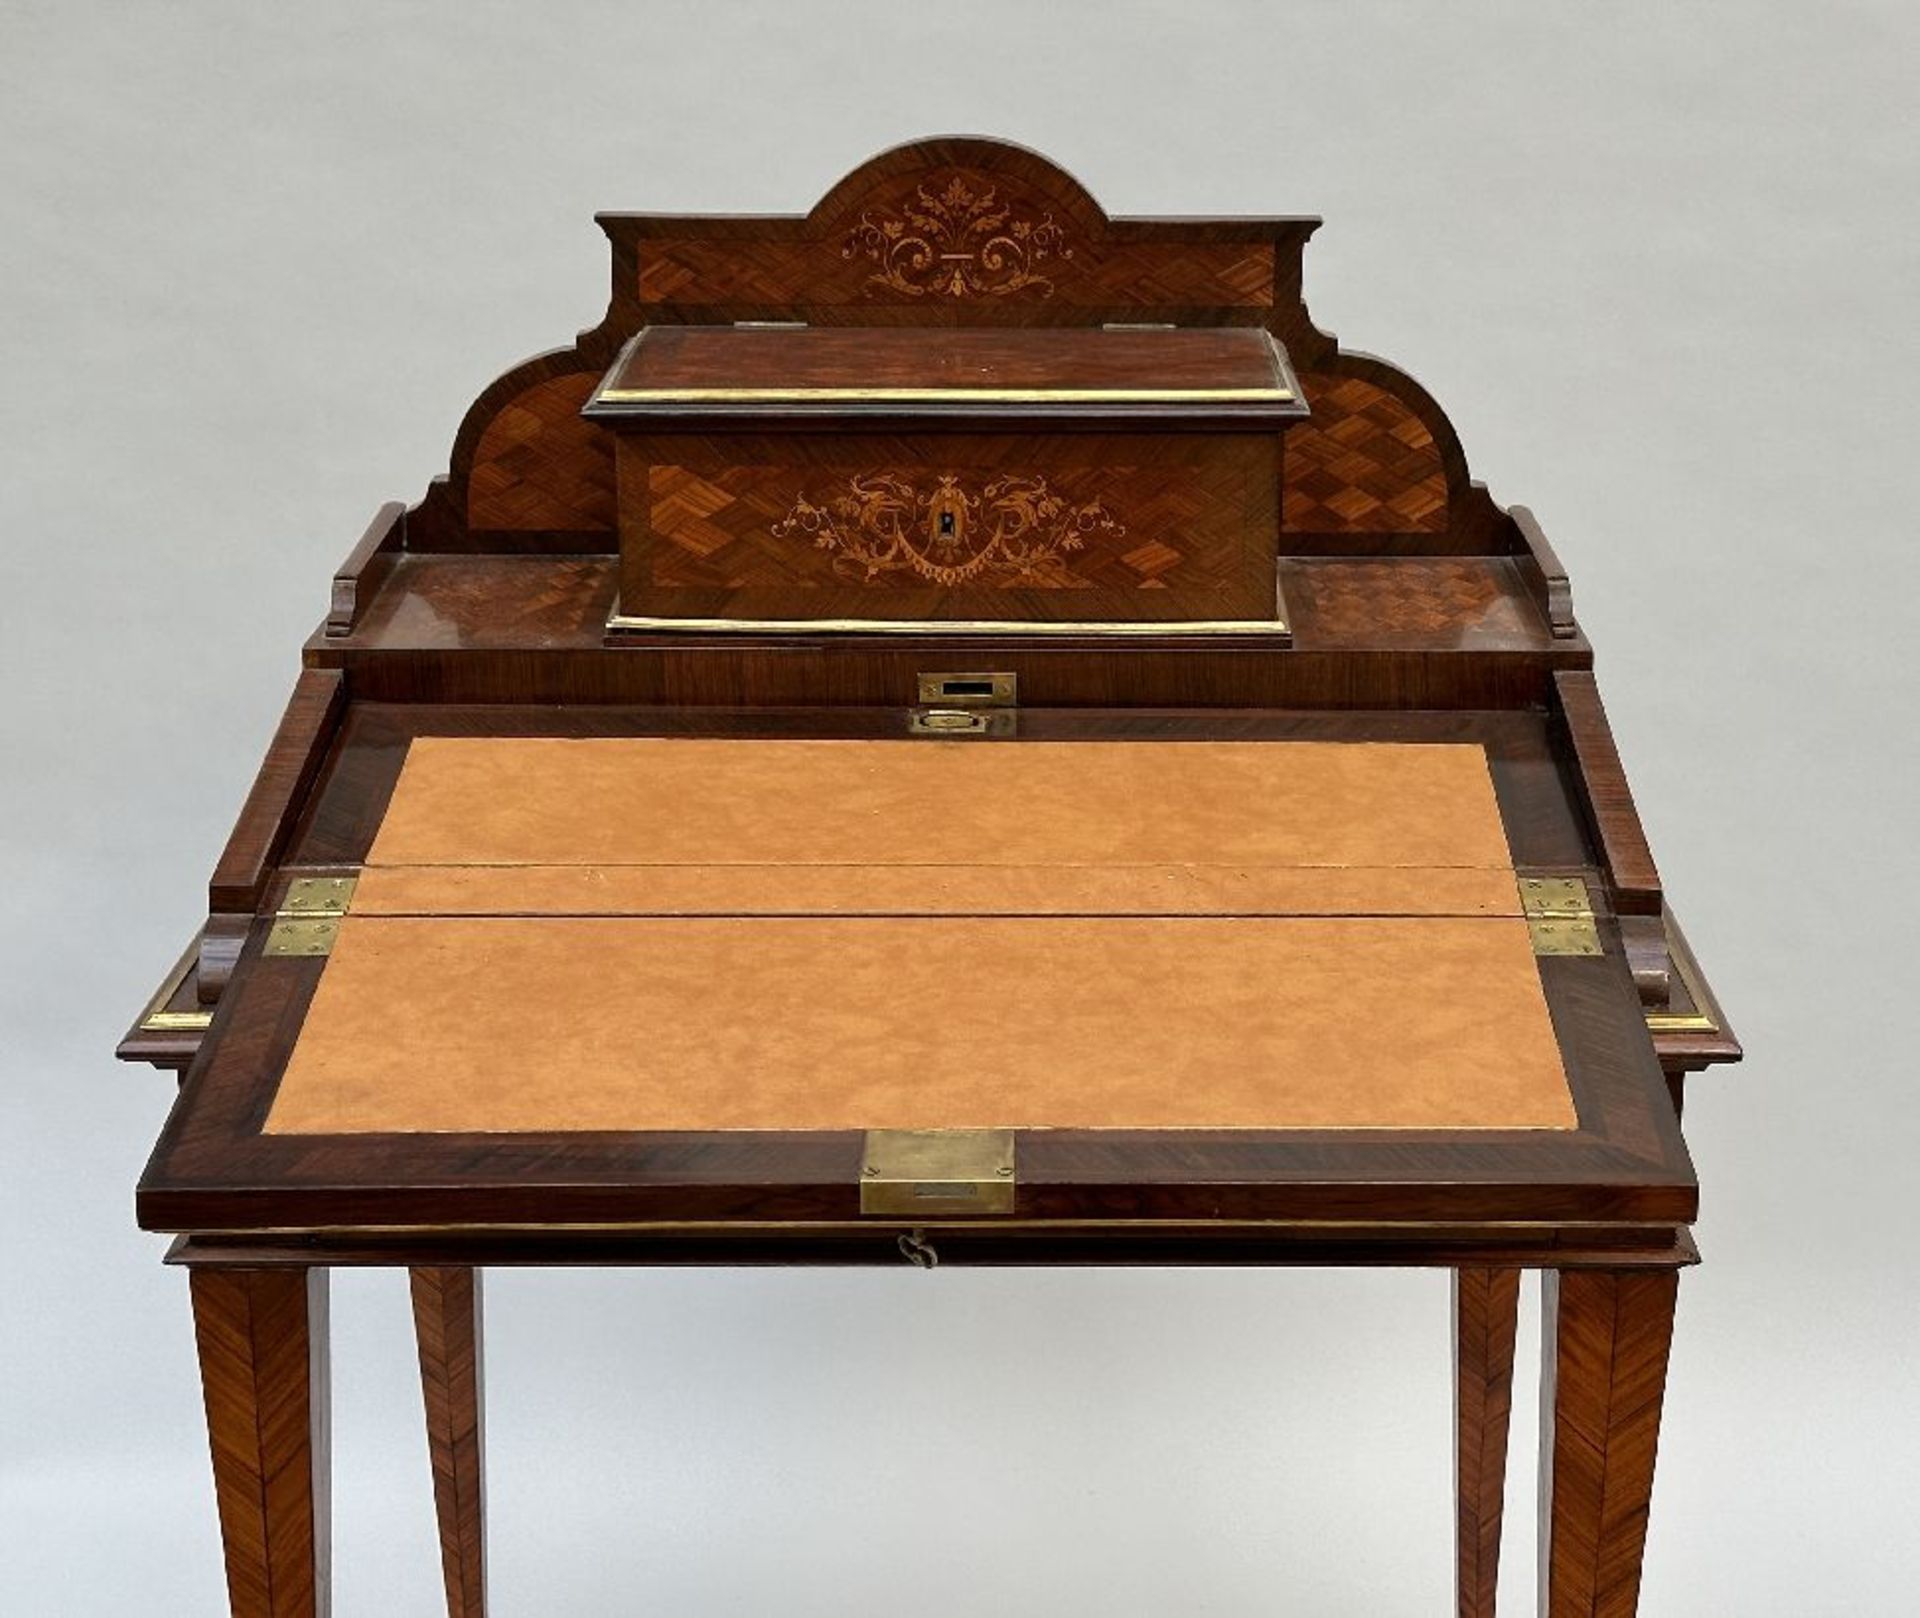 A Louis XVI style desk with inlaywork, 19th century - Image 2 of 5